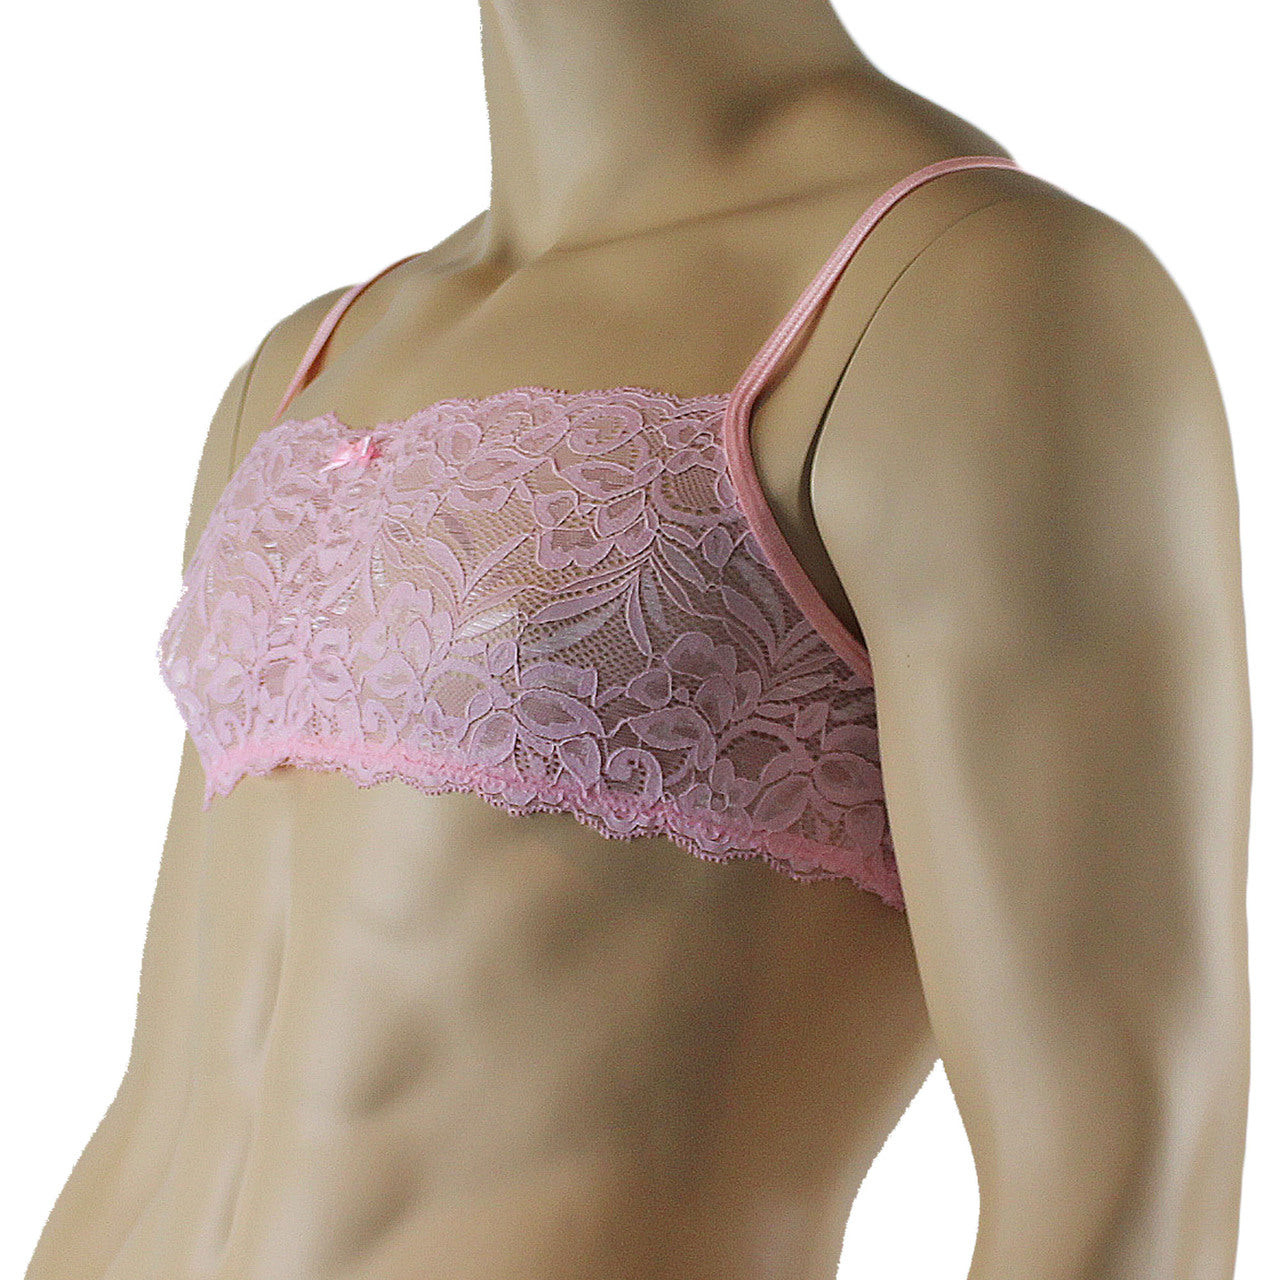 Mens Kristy Lingerie Bra Top in Lace with thin Straps Light Pink